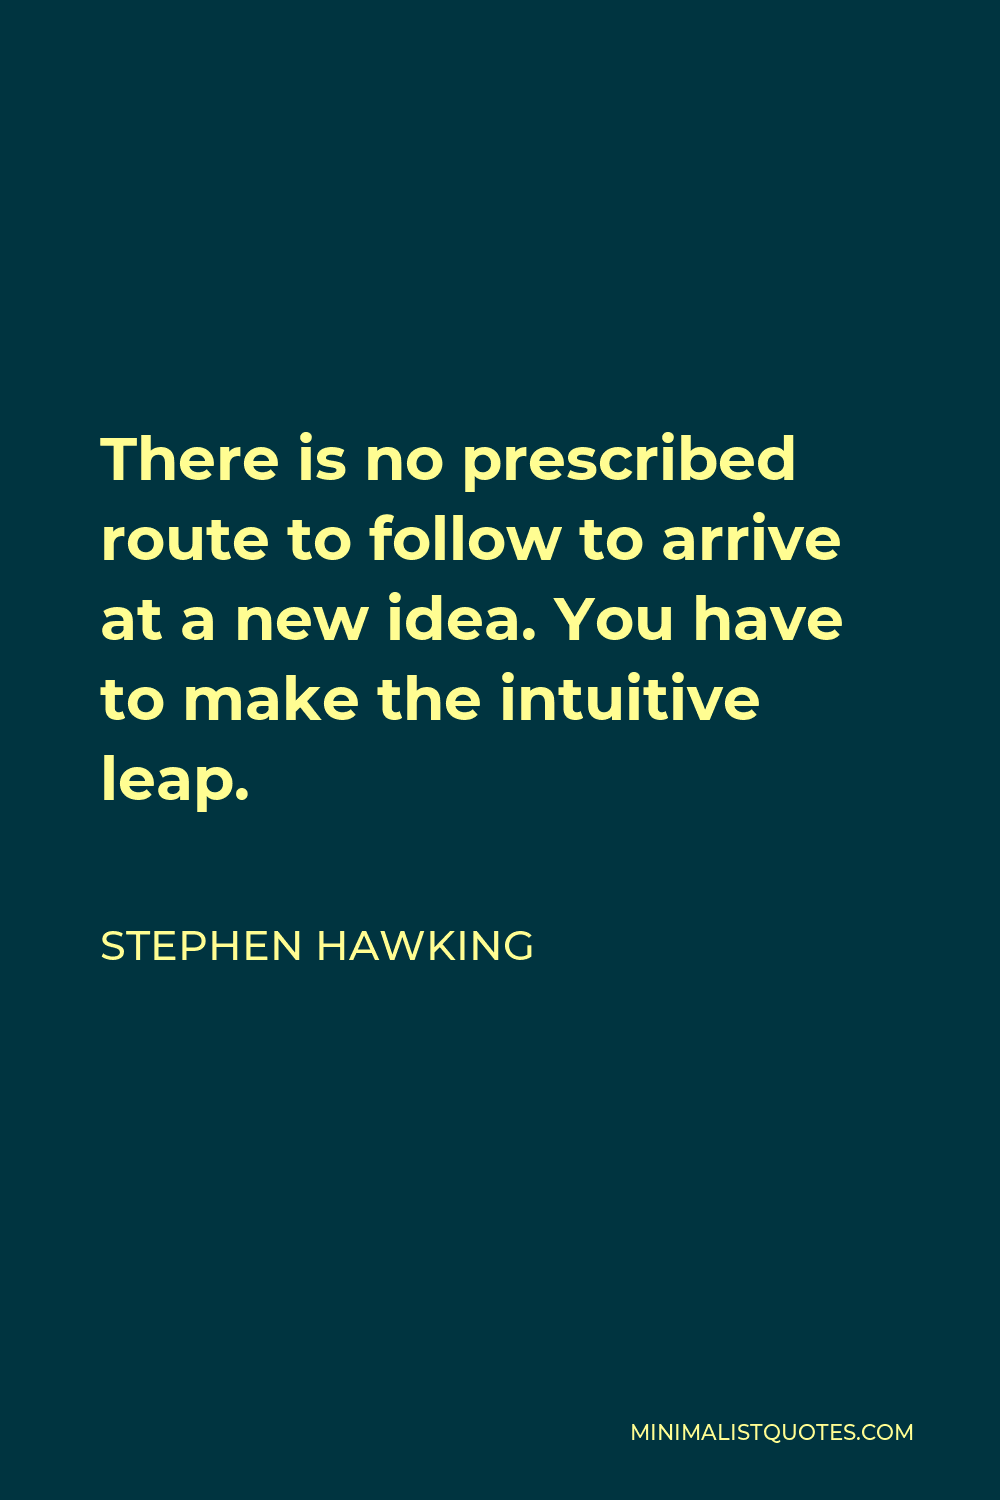 Stephen Hawking Quote - There is no prescribed route to follow to arrive at a new idea. You have to make the intuitive leap.